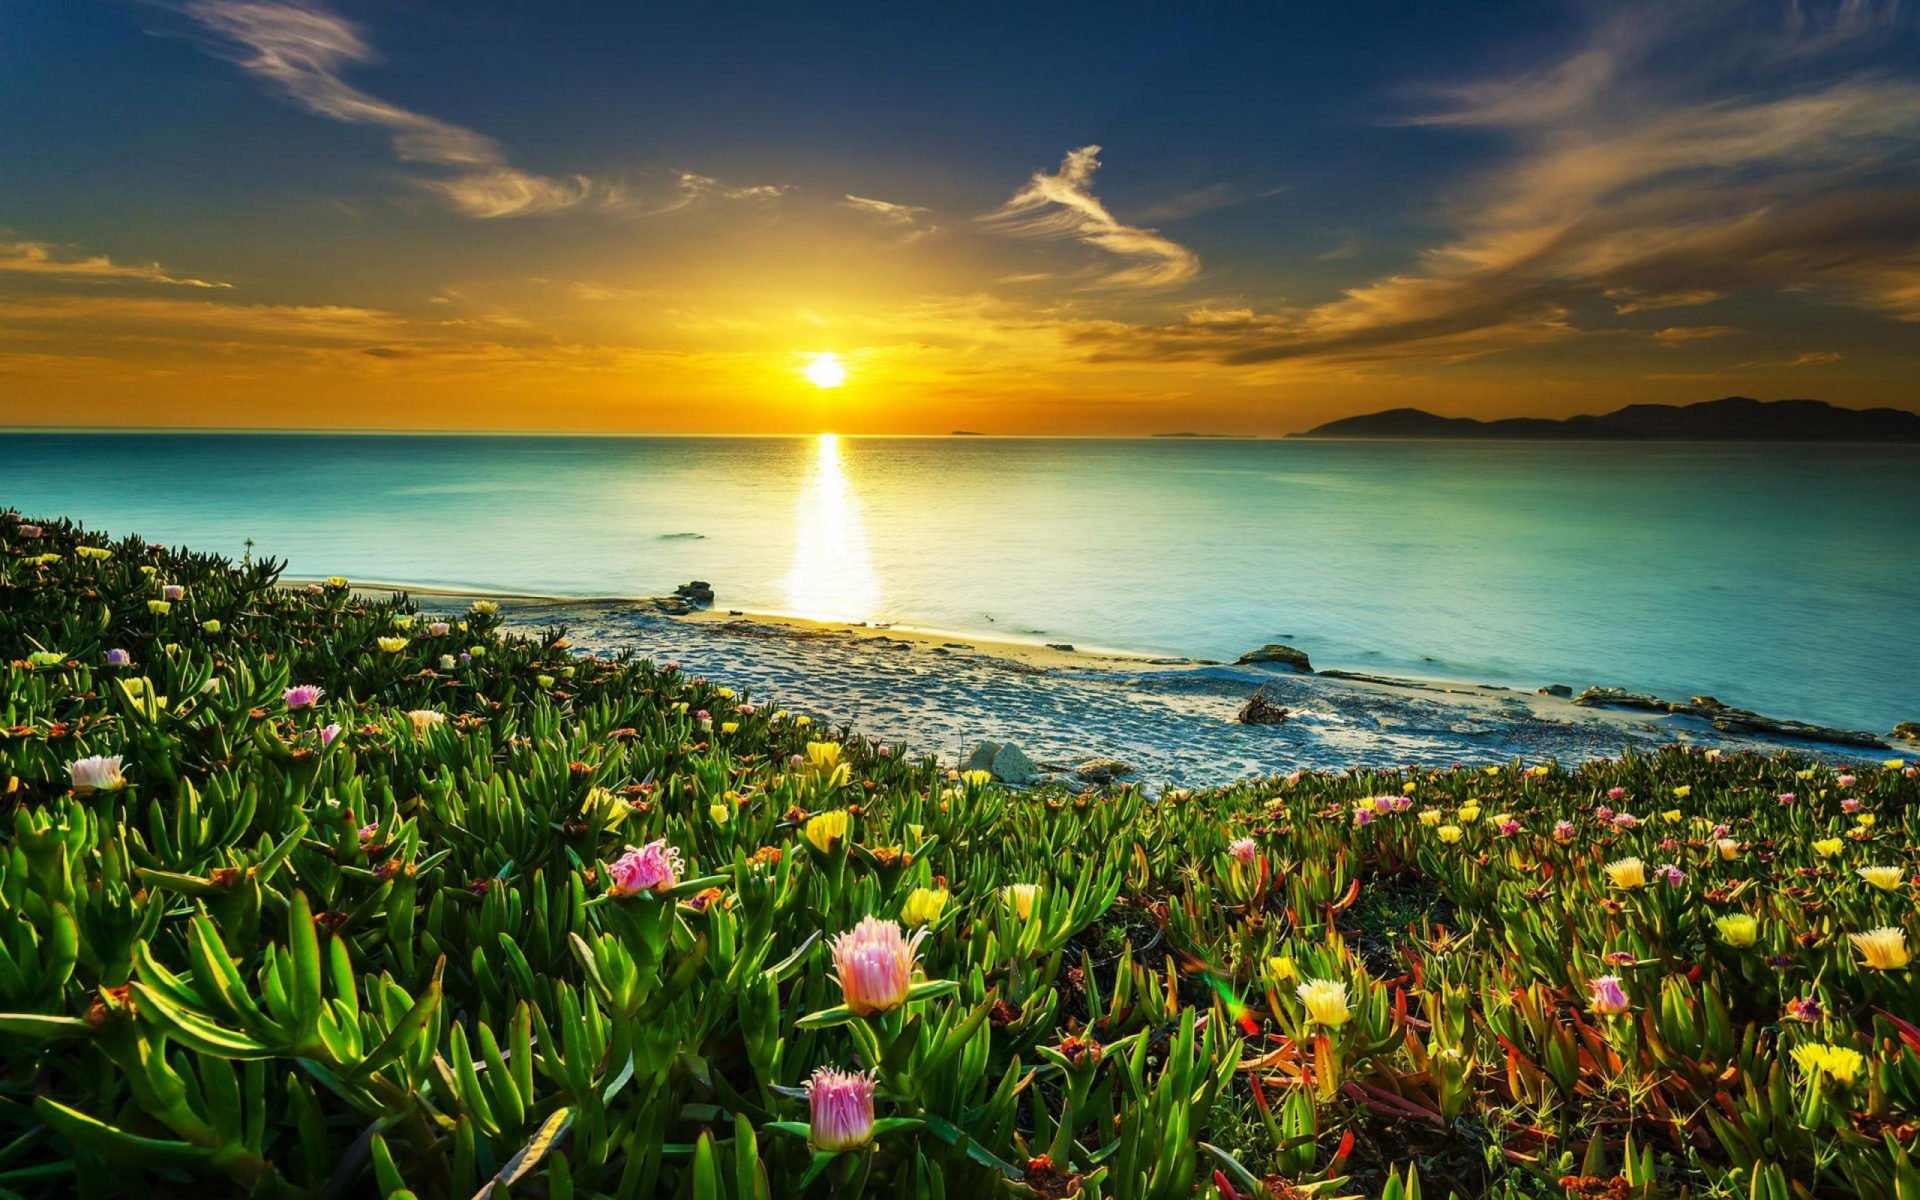 Sea Coast Meadow With Tropical Flowers Sandy Beach Calm Sea Orange Sky Sunset HD Wallpaper For Mobile Phones And Laptops, Wallpaper13.com